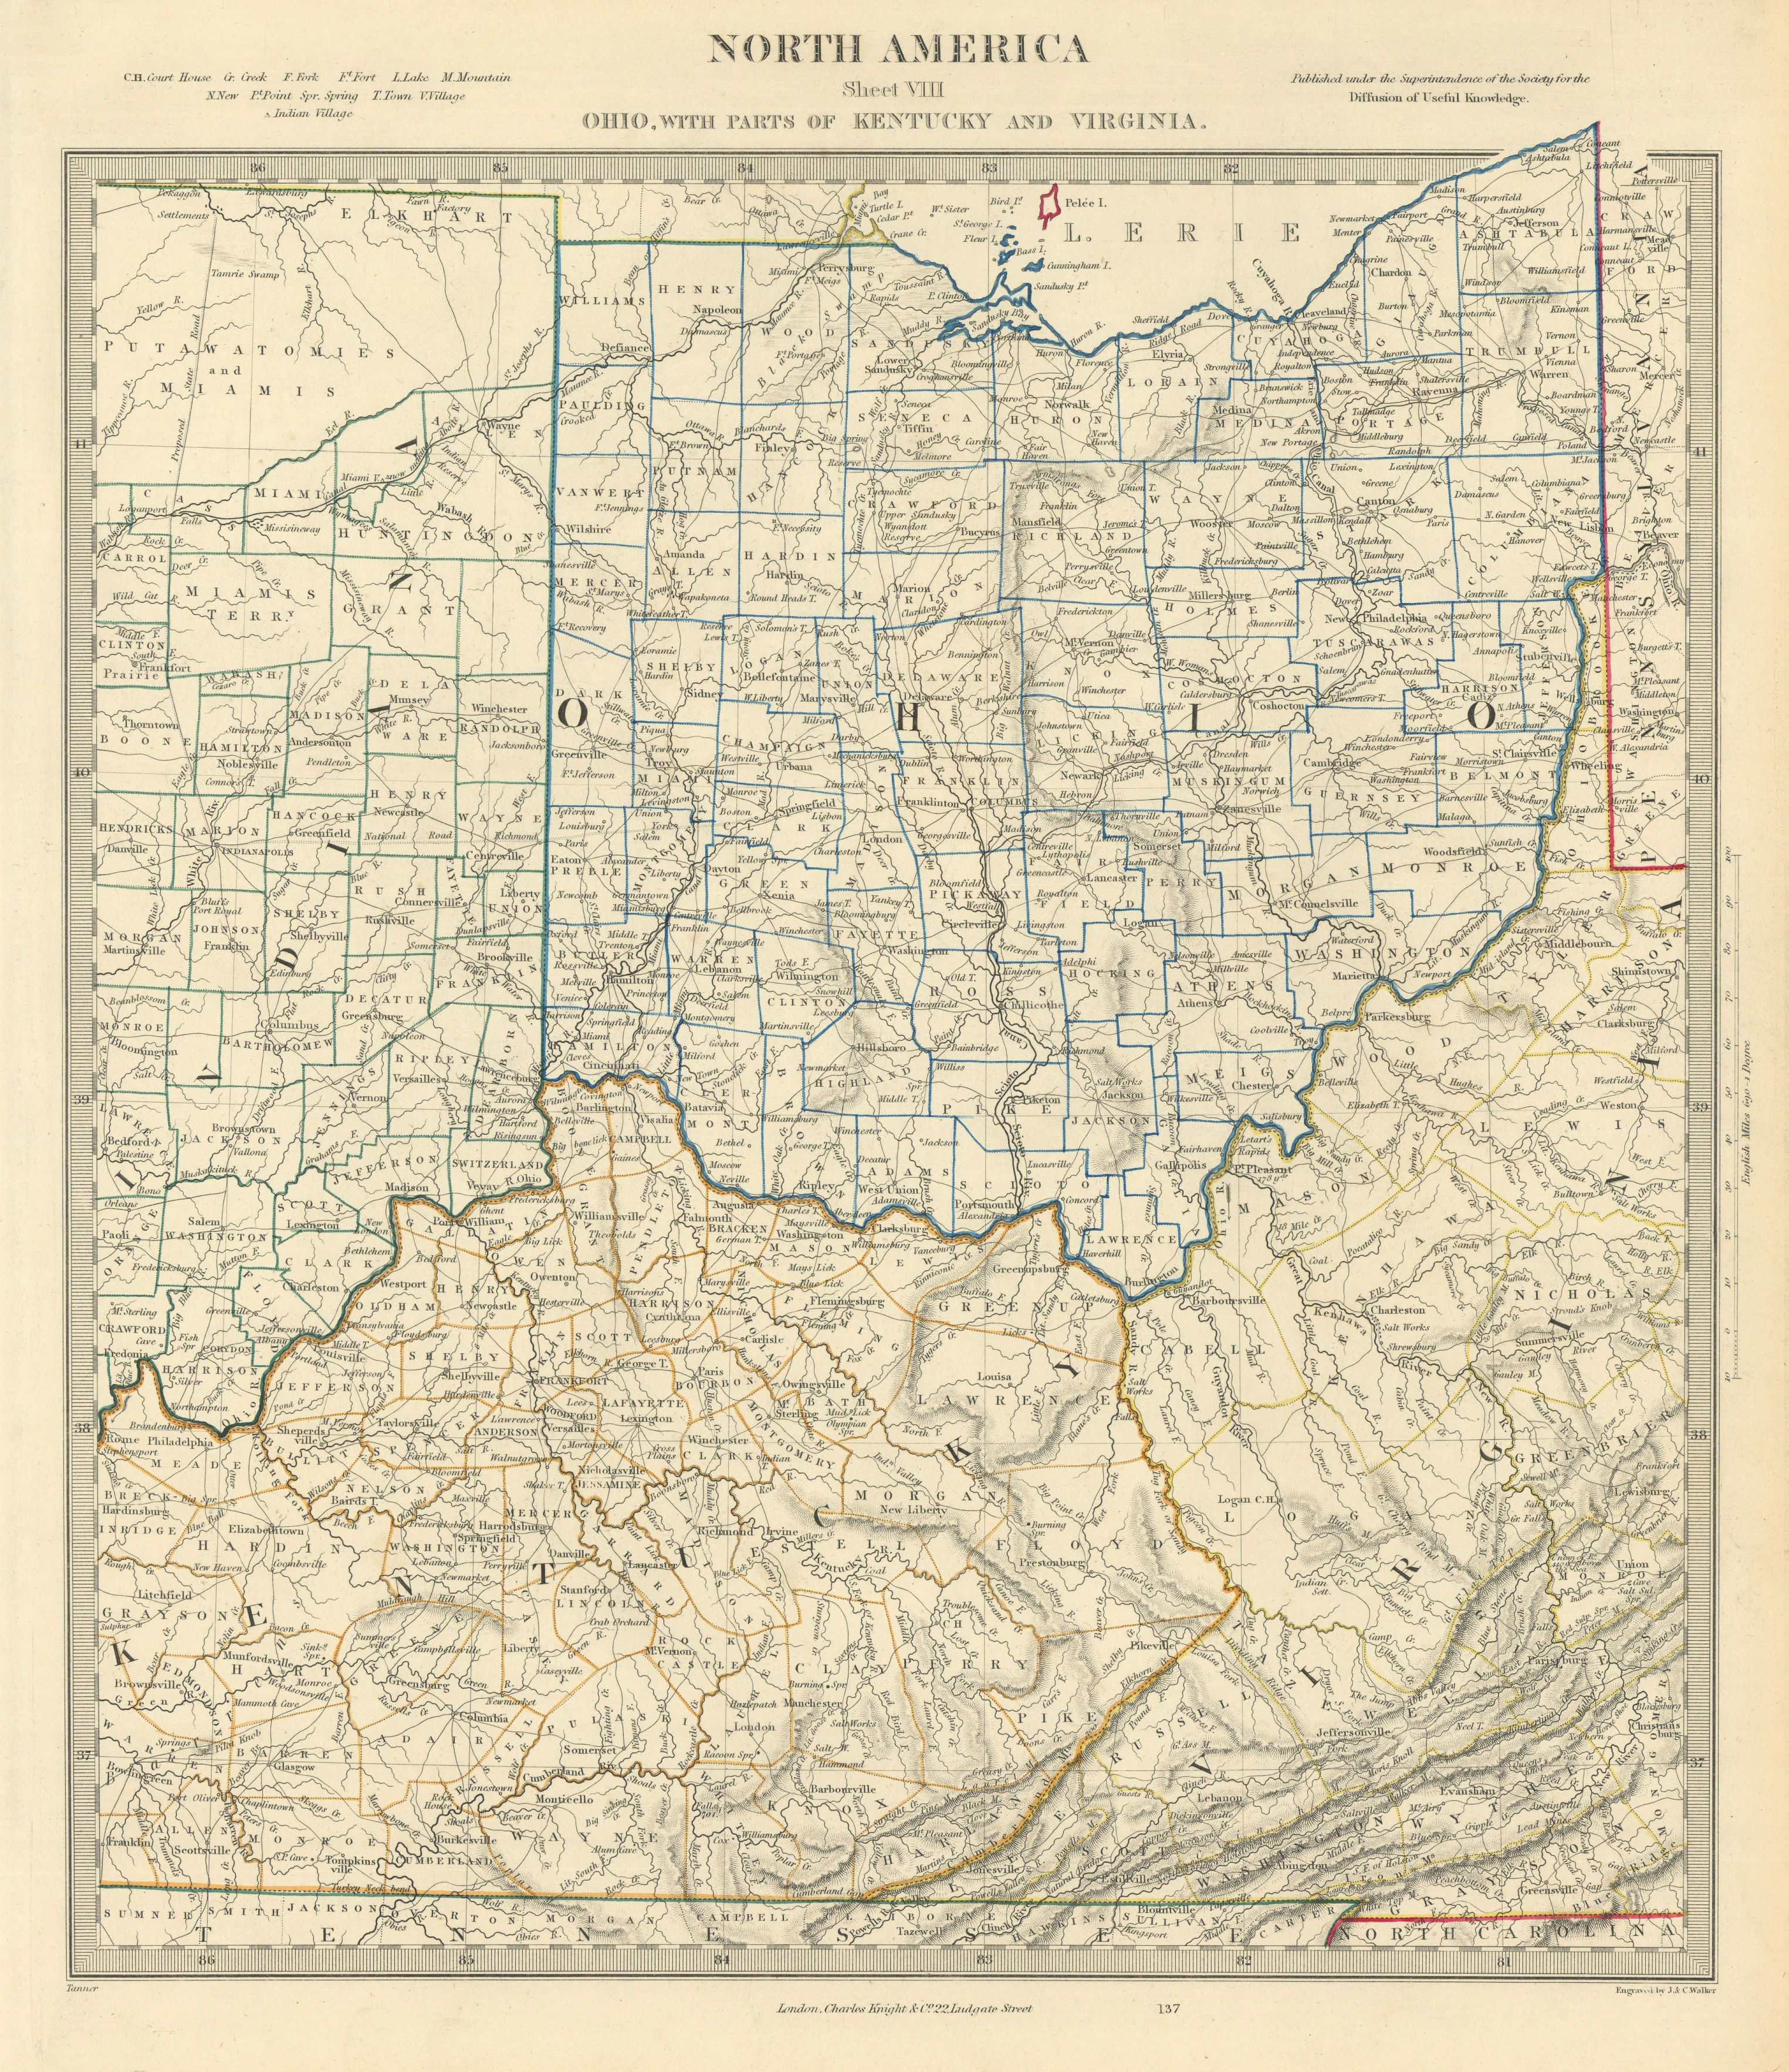 Associate Product USA. Ohio with parts of Kentucky, Virginia & Indiana. Counties. SDUK 1851 map